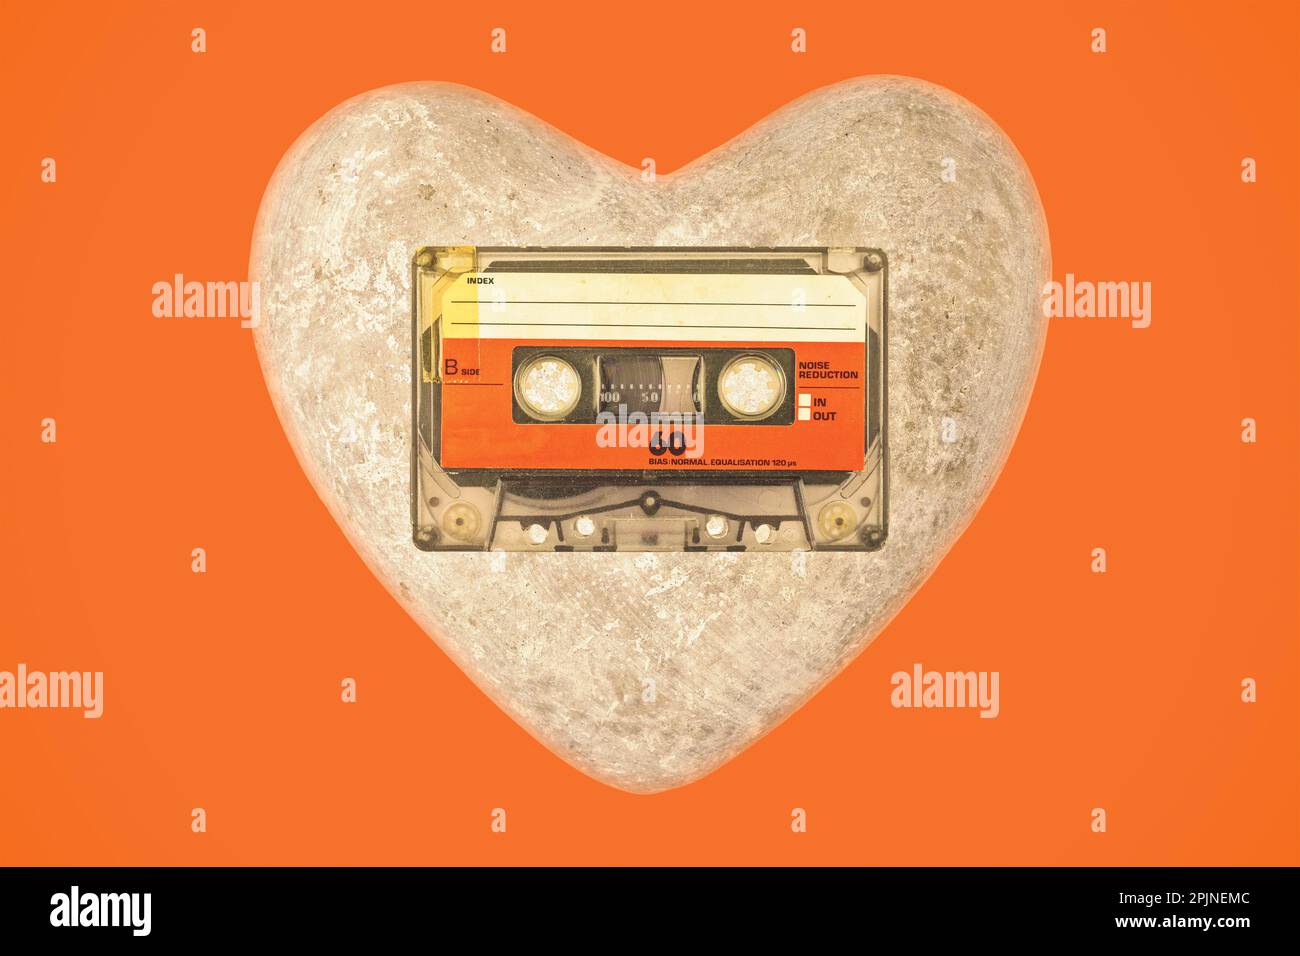 Vintage audio compact cassette with heart on an orange background Stock Photo